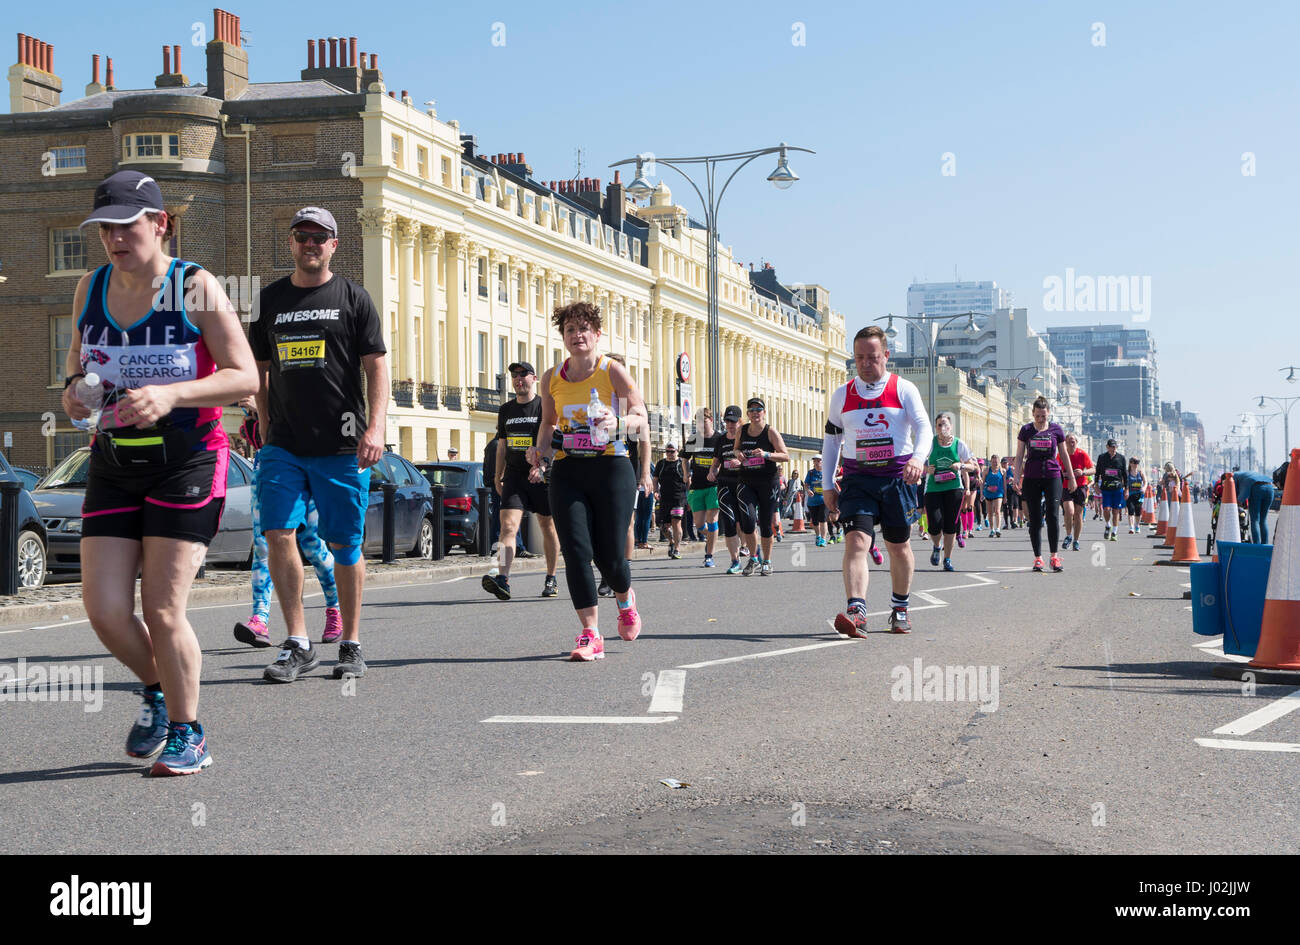 Brighton, UK. 9th Apr, 2017. Thousands of people braved the heat on the hottest day of the year so far to participate in the Brighton Marathon. Credit: Elizabeth Wake/Alamy Live News Stock Photo